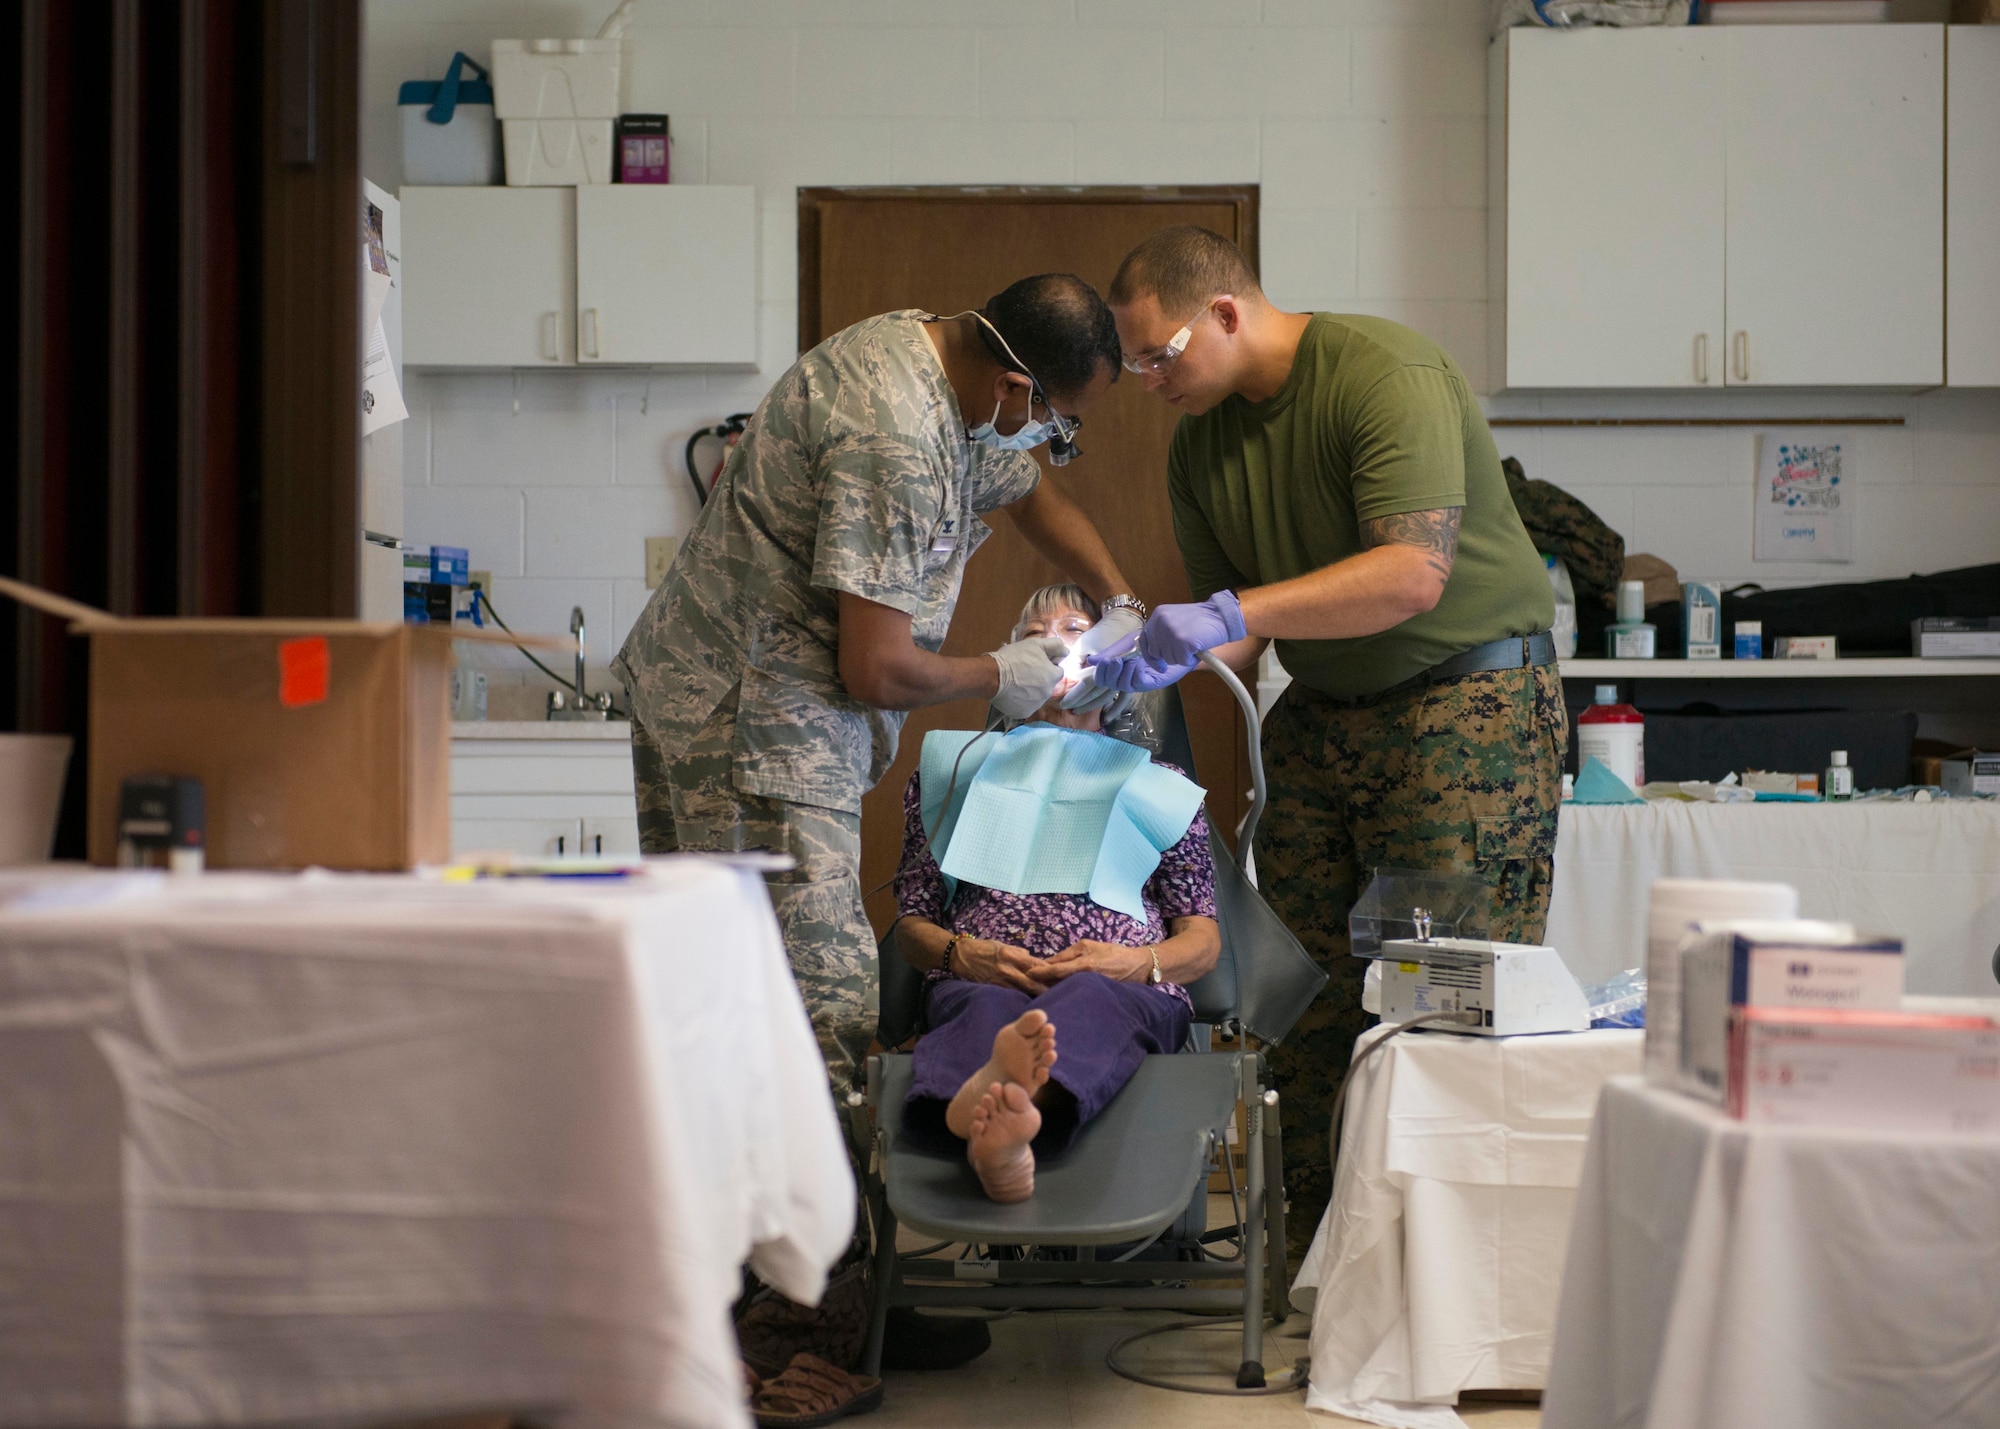 U.S. Air Force Col. Thaddeus Phillips, commander of the 2d Dental Squadron, gets assistance with a patient from U.S. Navy Petty Officer 2nd Class Brian O’Donnell, during Tropic Care Maui County 2018 in Lahaina, Hawaii, Aug. 12, 2018. (U.S. Air National Guard photo by 2nd Lt. Chelsea Clark)